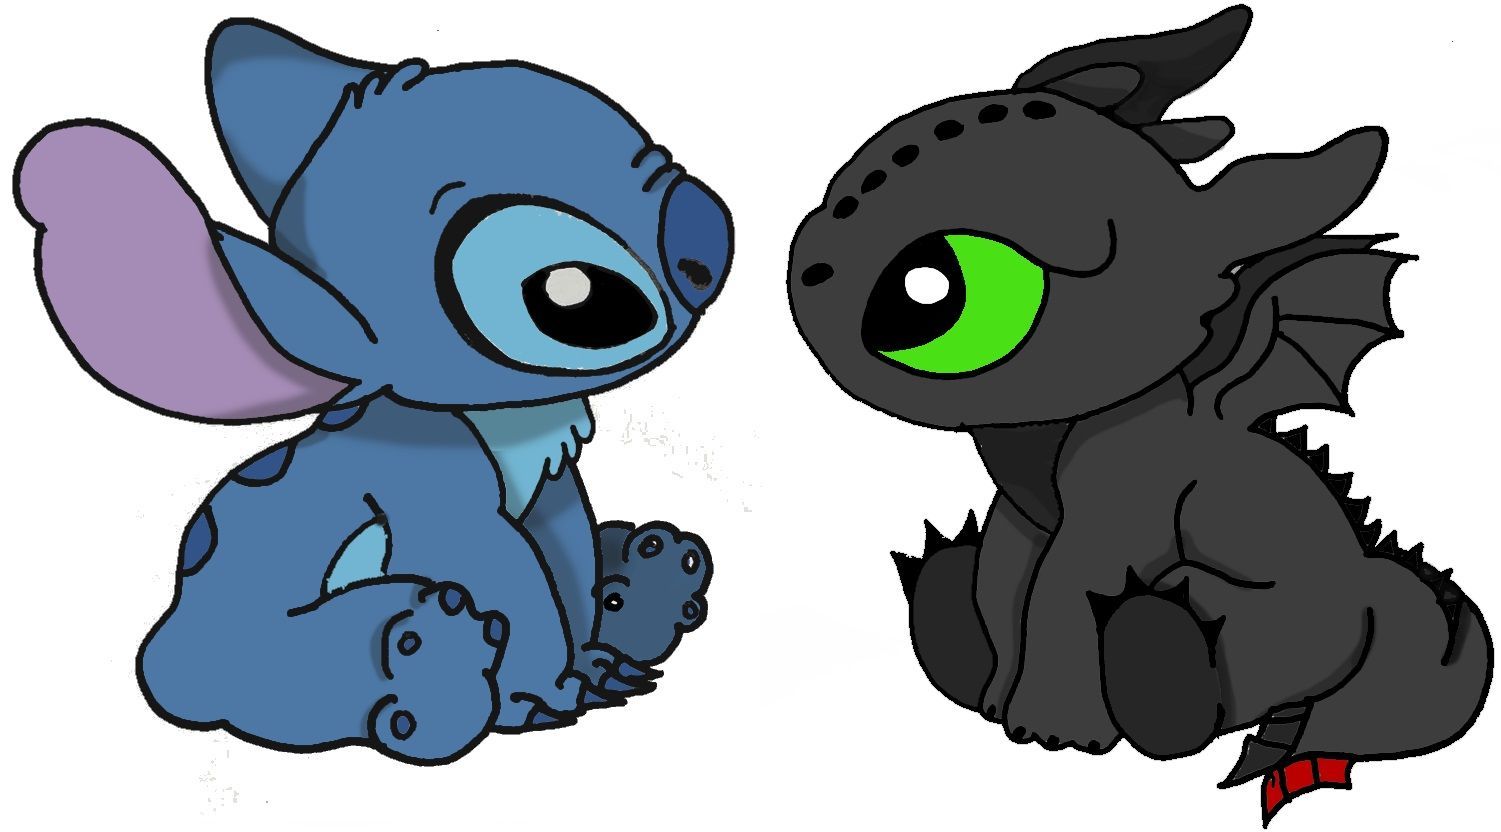 Toothless and Stitch wallpaper by Muska666  Download on ZEDGE  8010